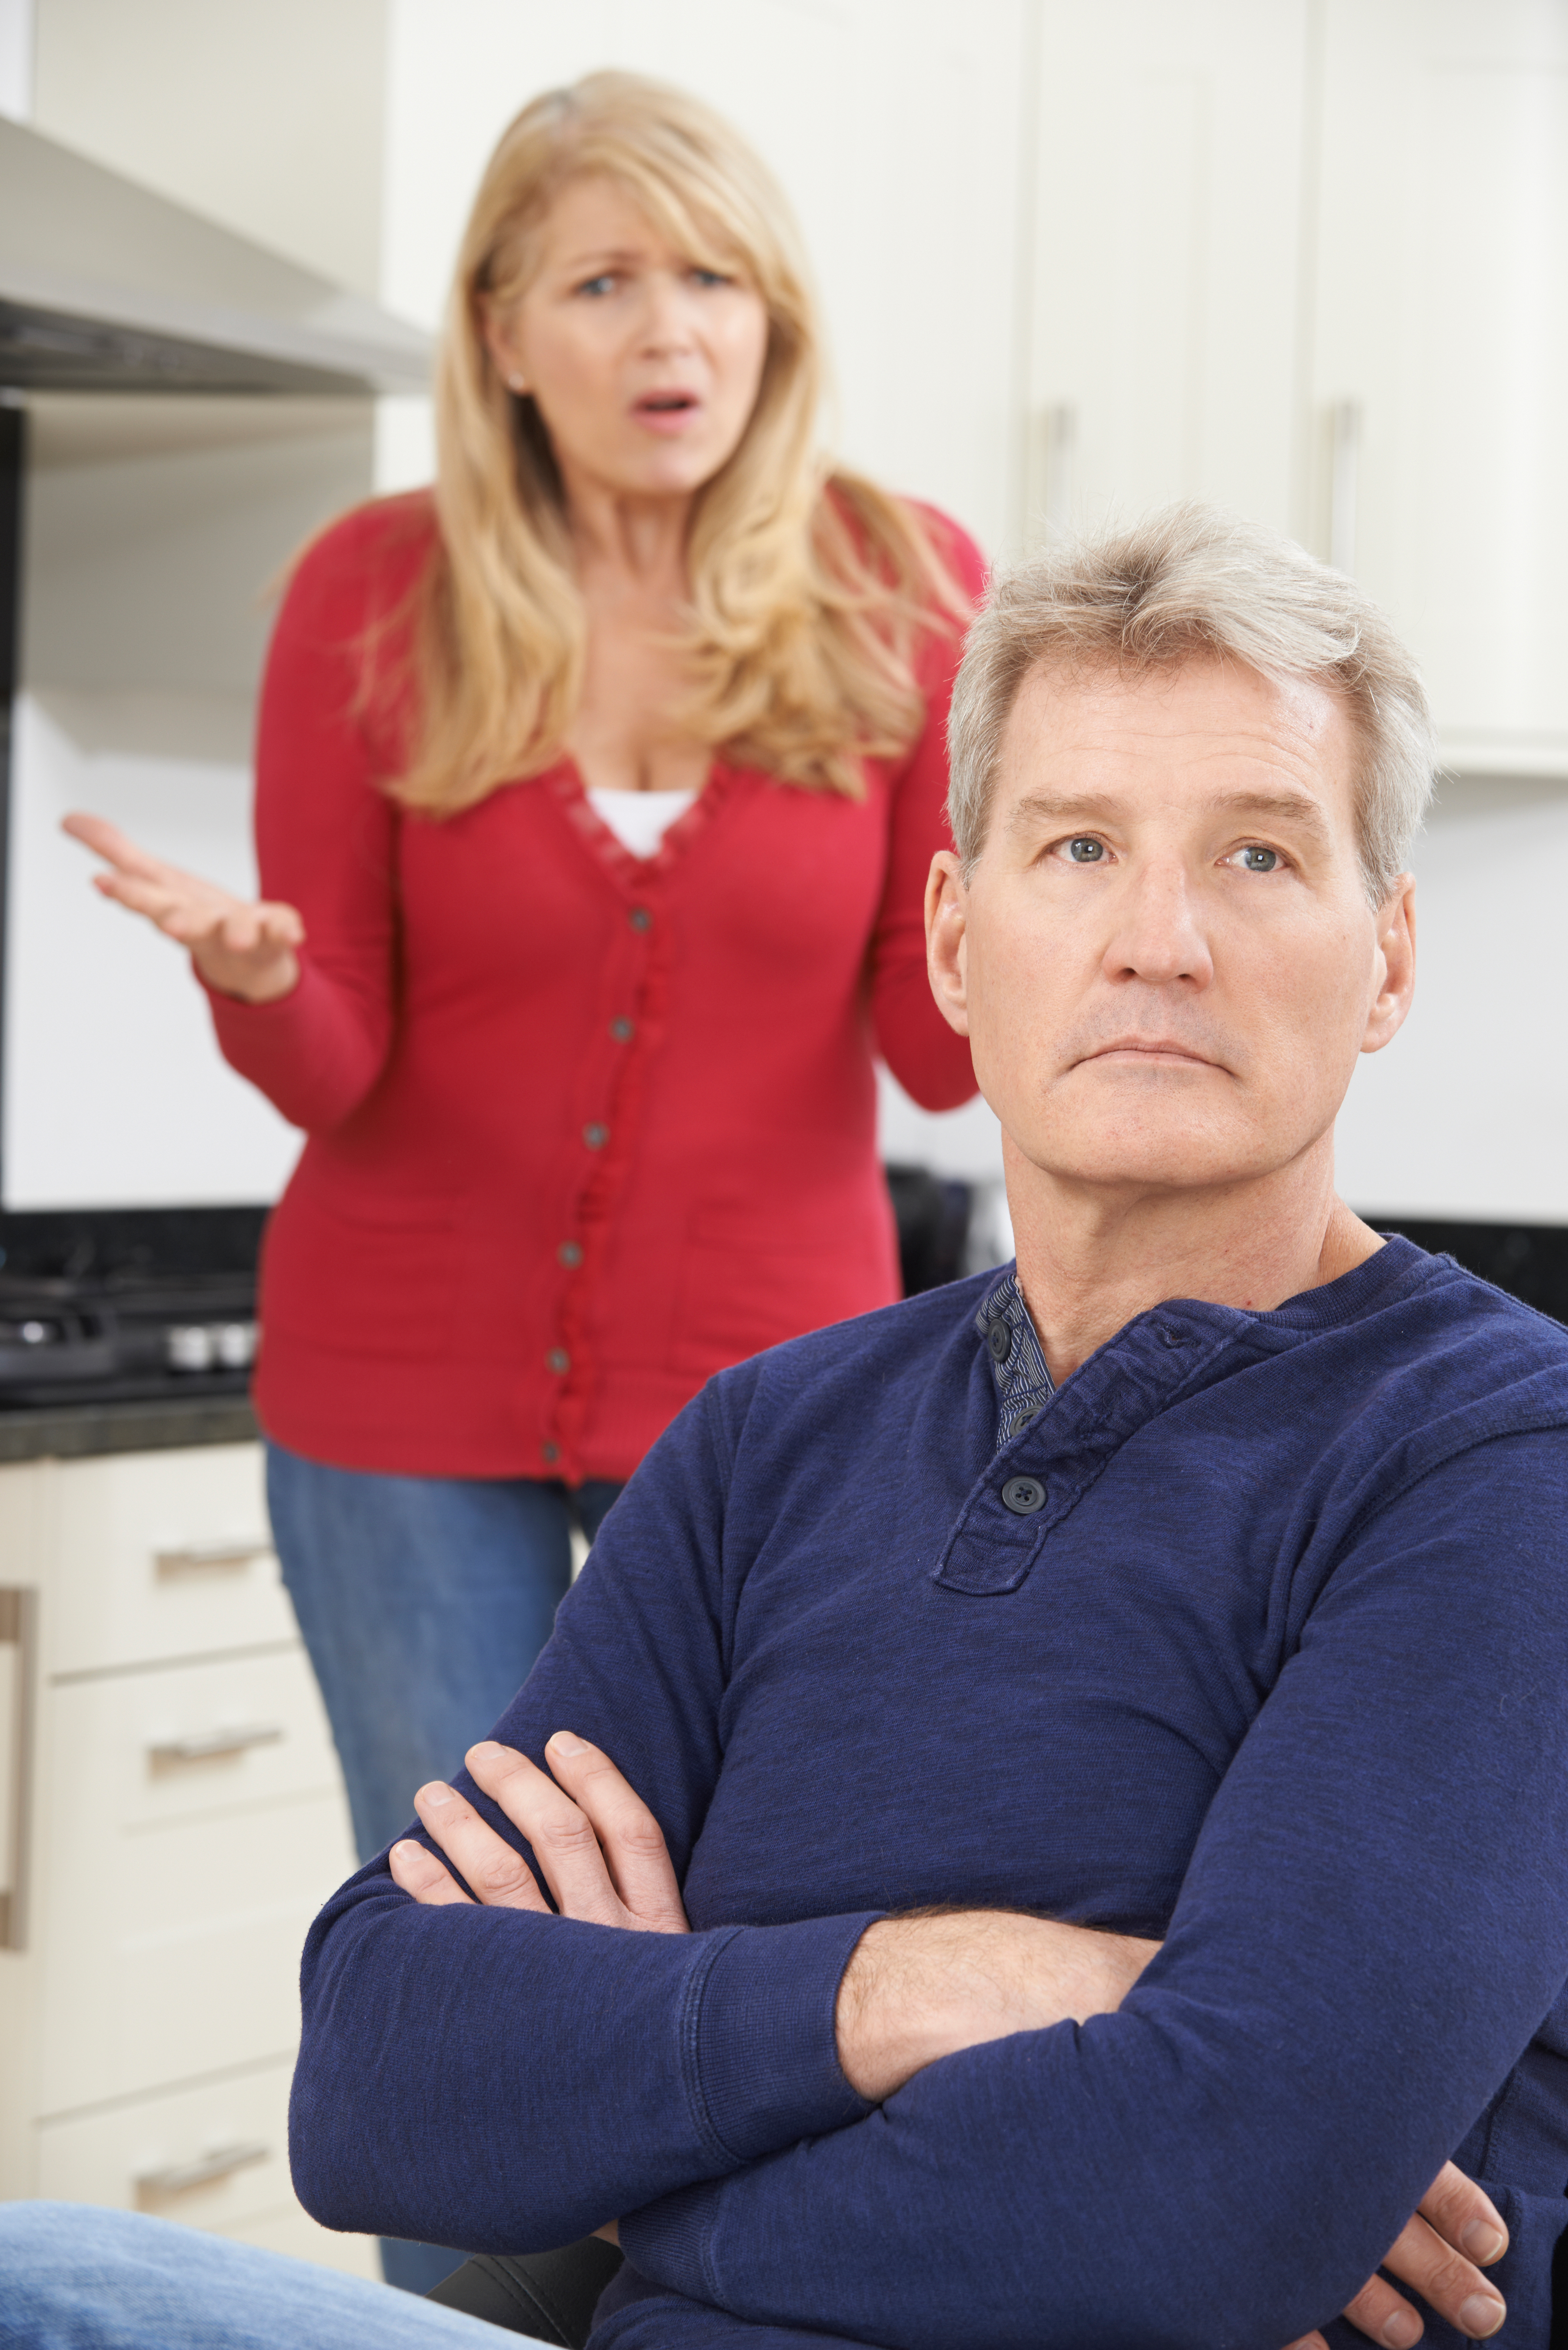 A middle-aged couple arguing at home | Source: Shutterstock